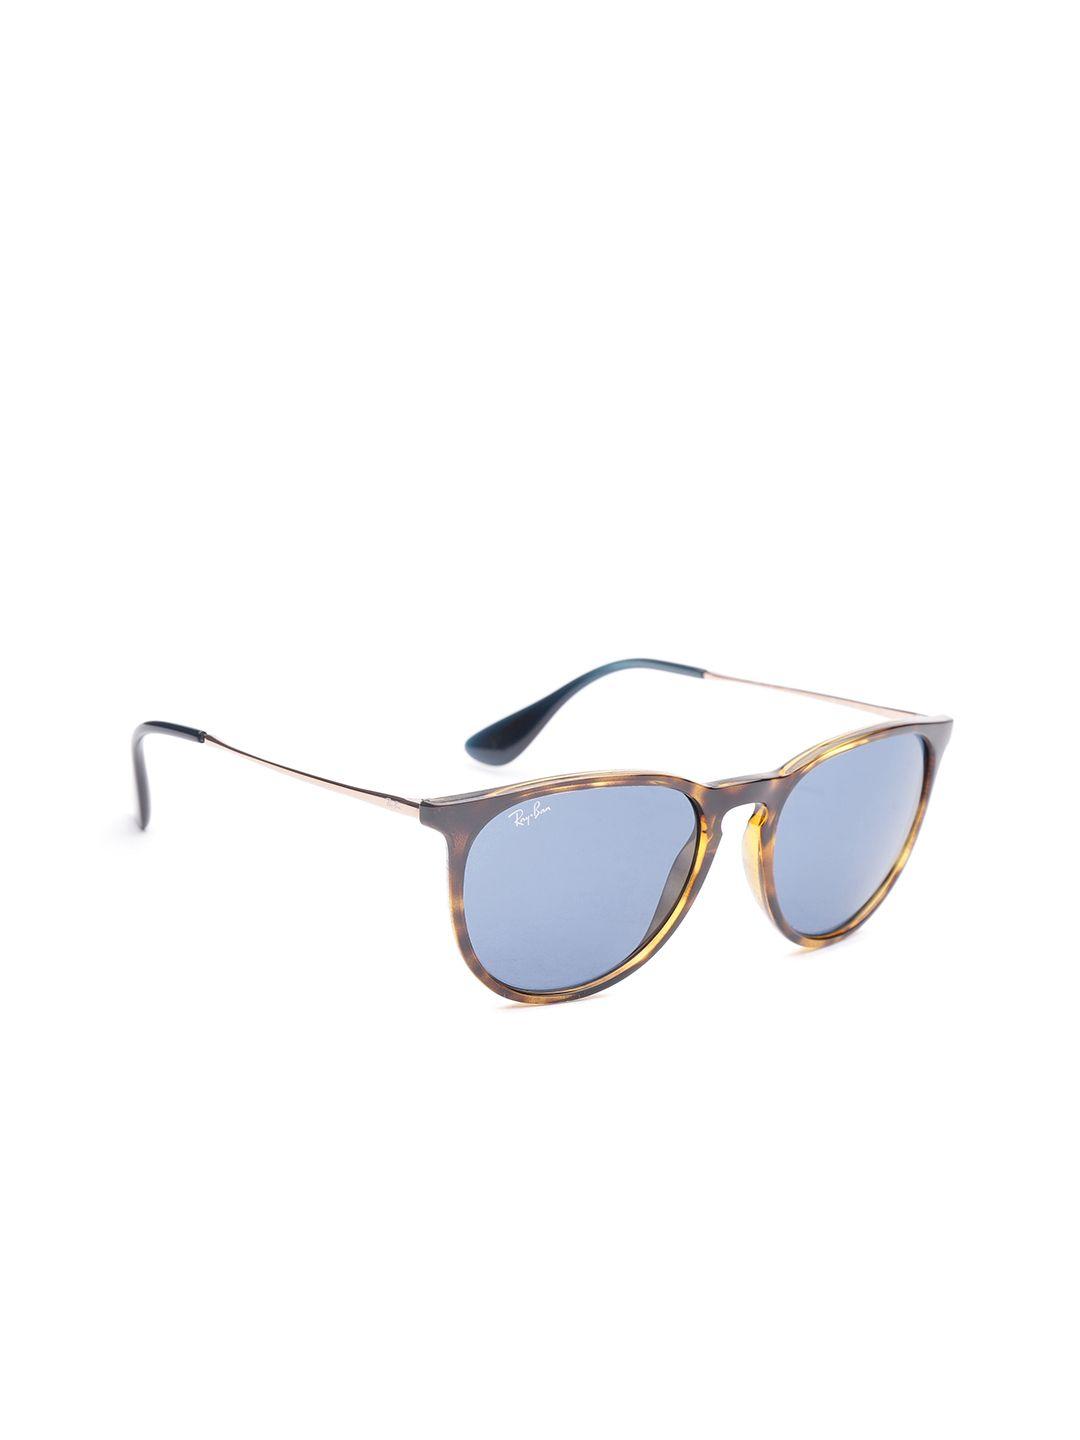 ray-ban unisex oval sunglasses 0rb417163908054